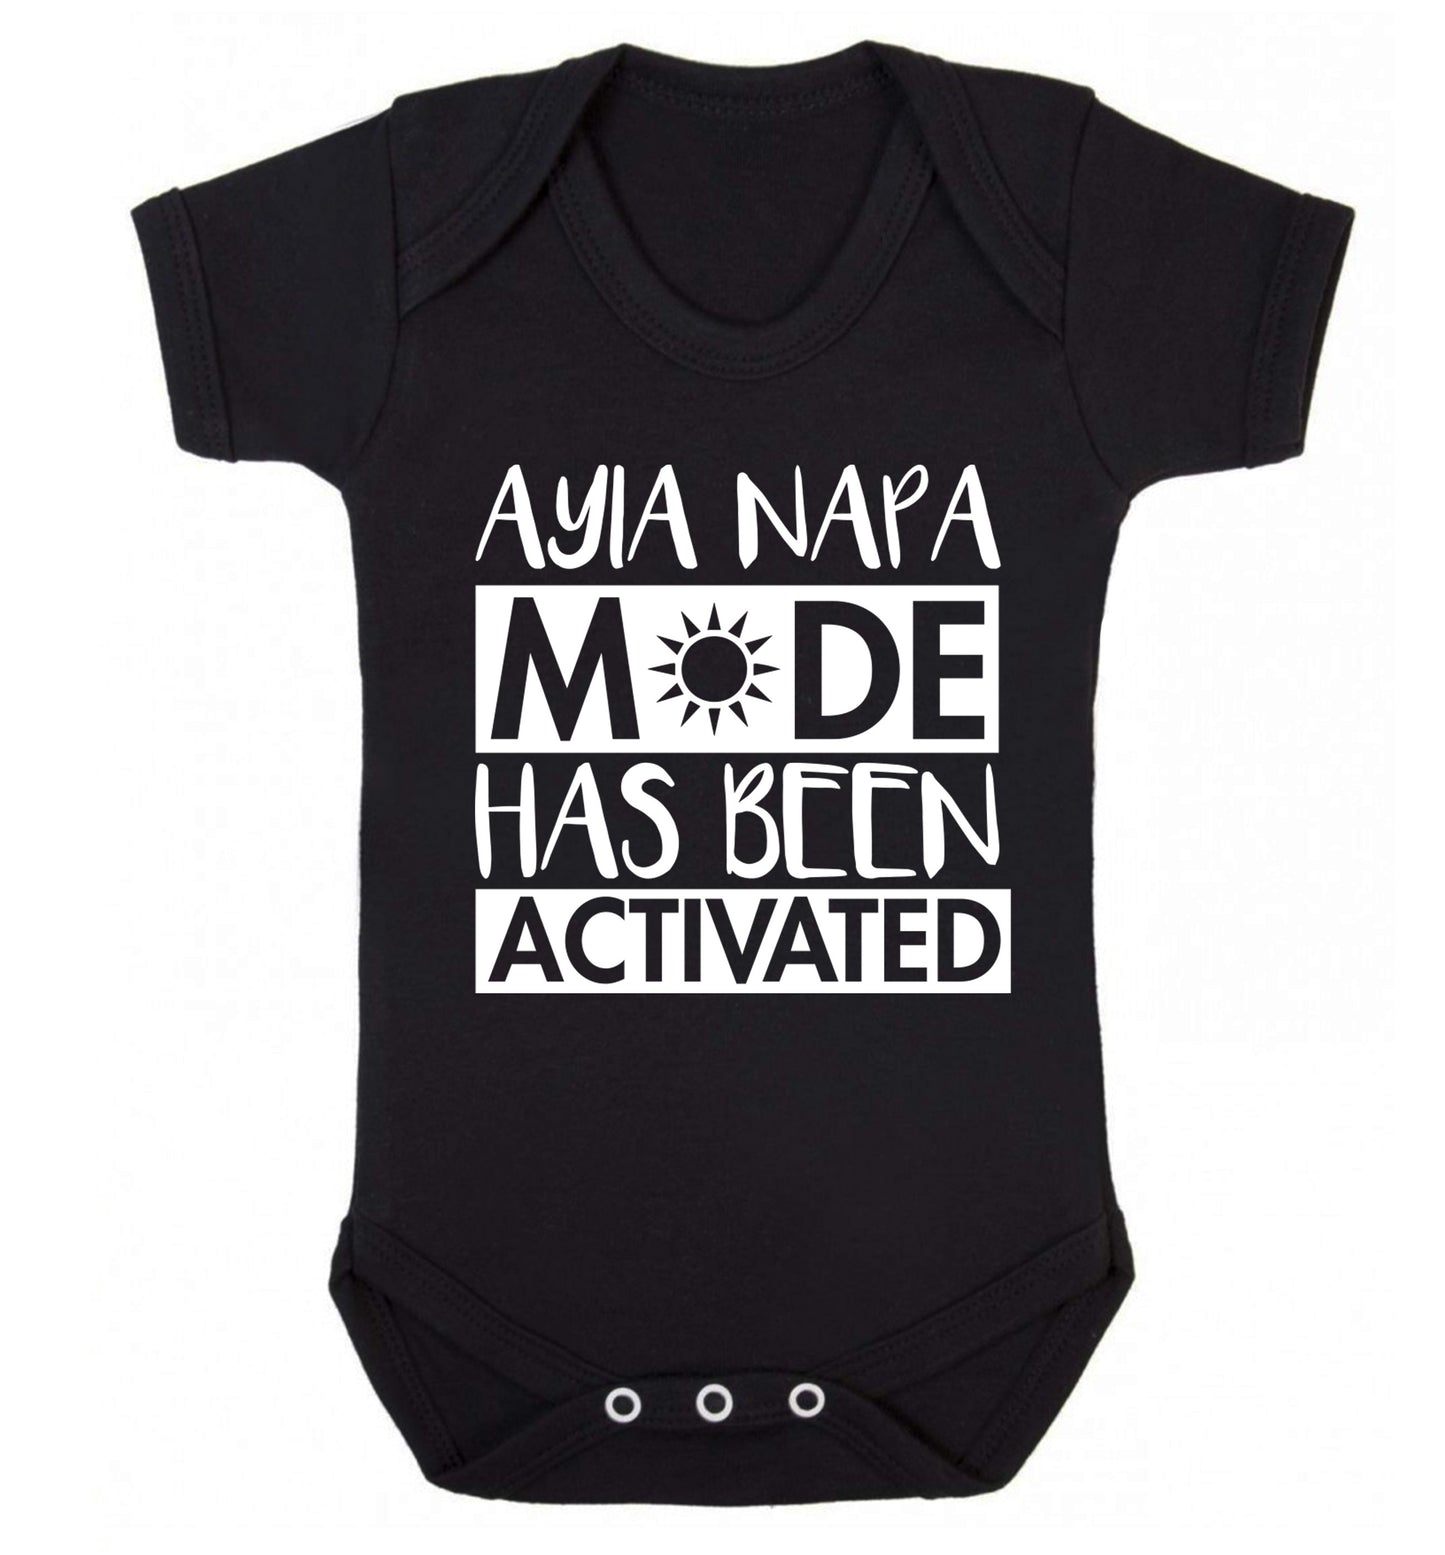 Aiya Napa mode has been activated Baby Vest black 18-24 months